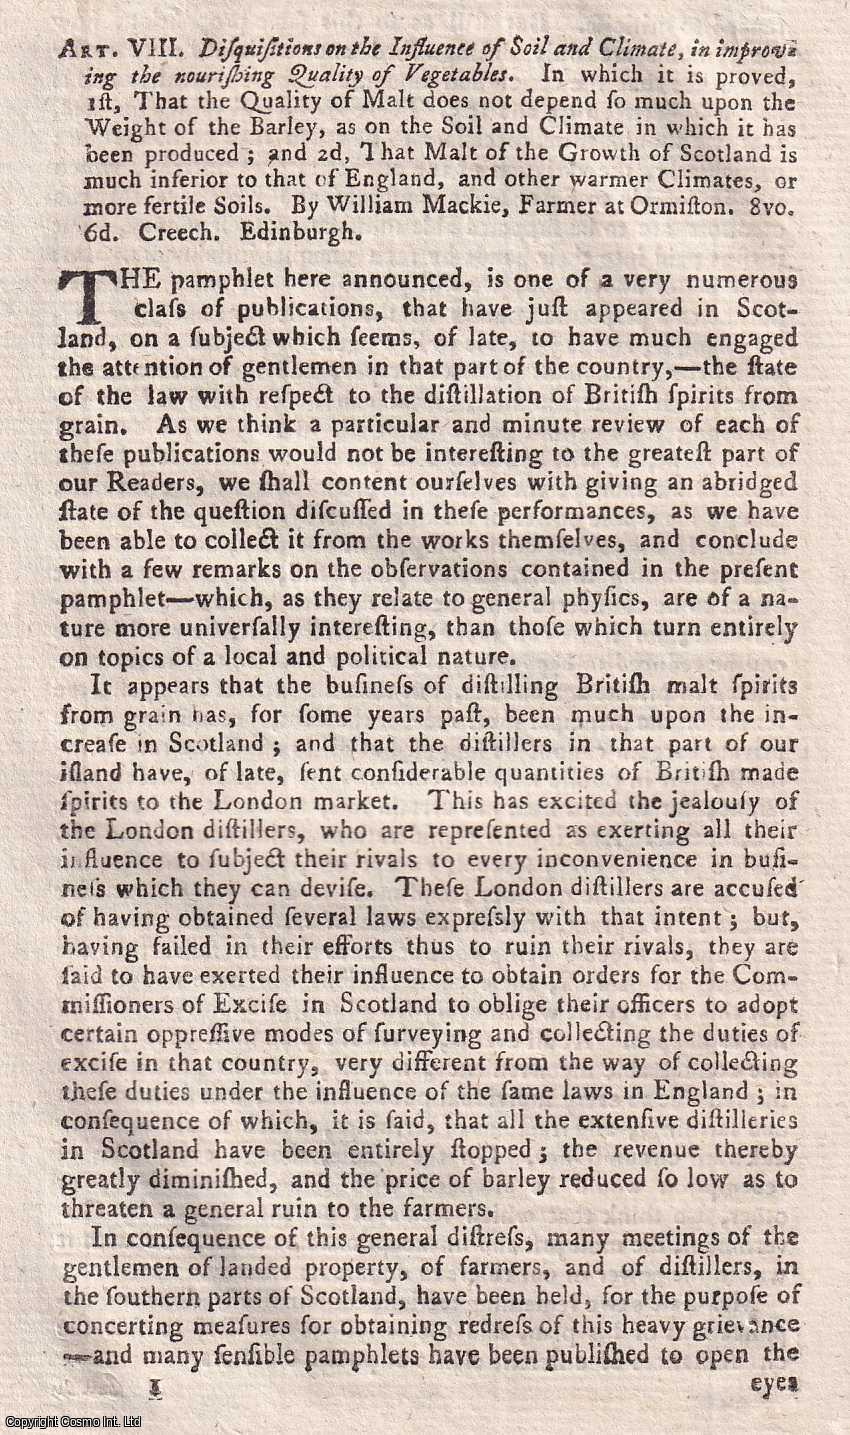 Author Not Stated - Disquisitions on the Influence of Soil and Climate, in improving the nourishing Quality of Vegetables, by William Mackie, Farmer at Ormiston. An original essay from the Monthly Review, 1786. No author is given for this article.